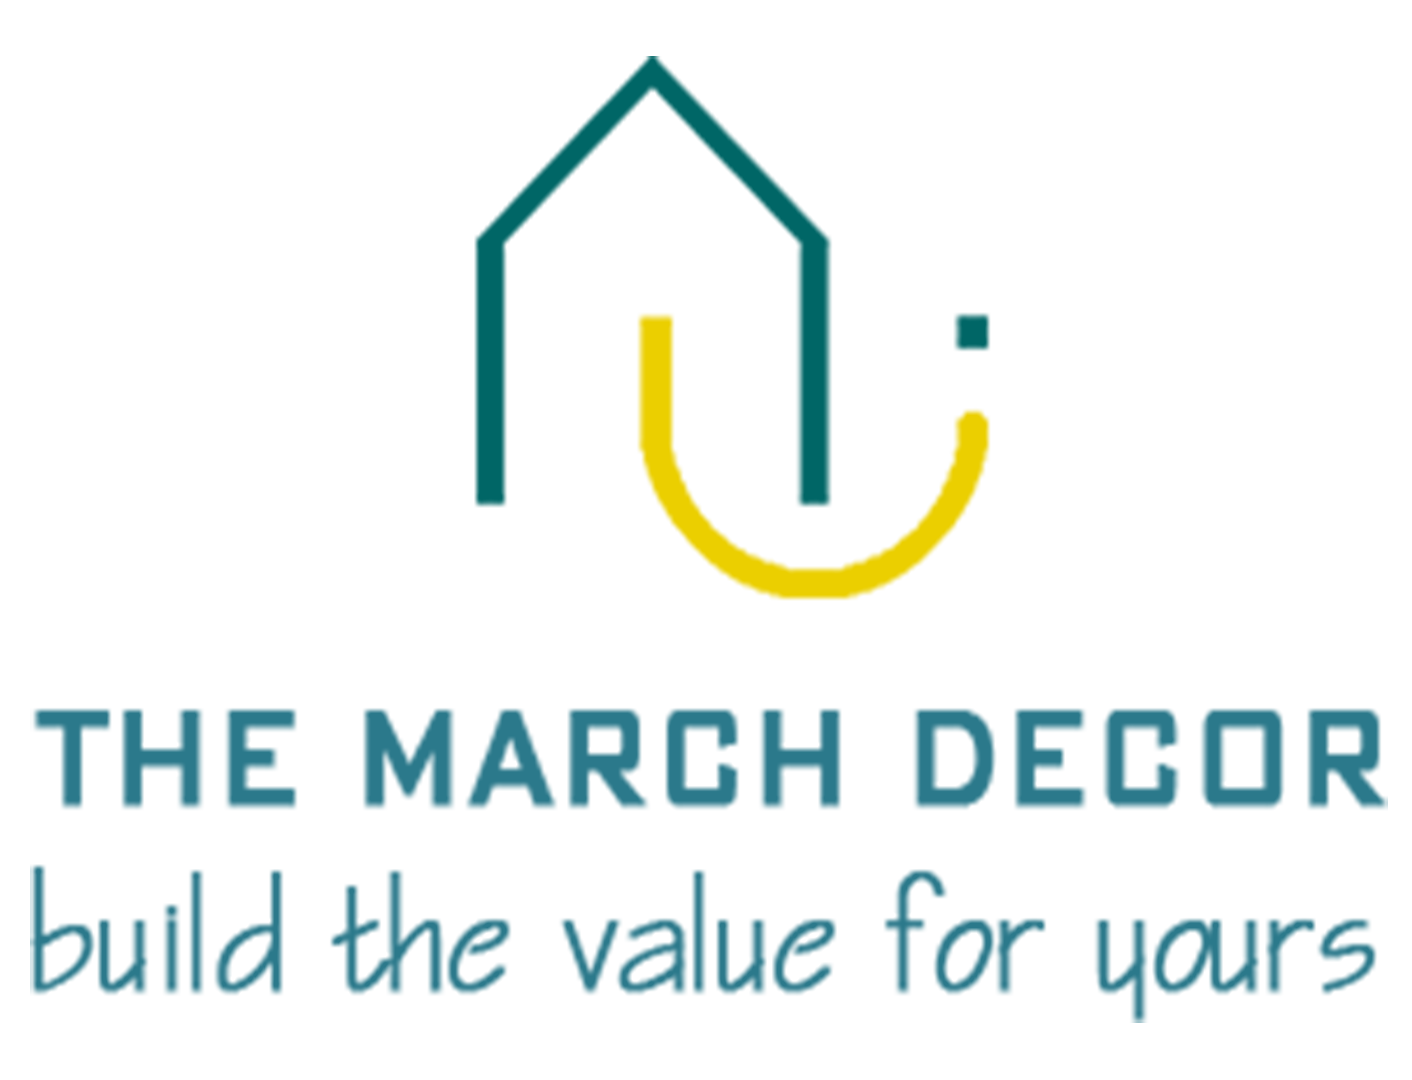 The March Decor – Build the value for yours